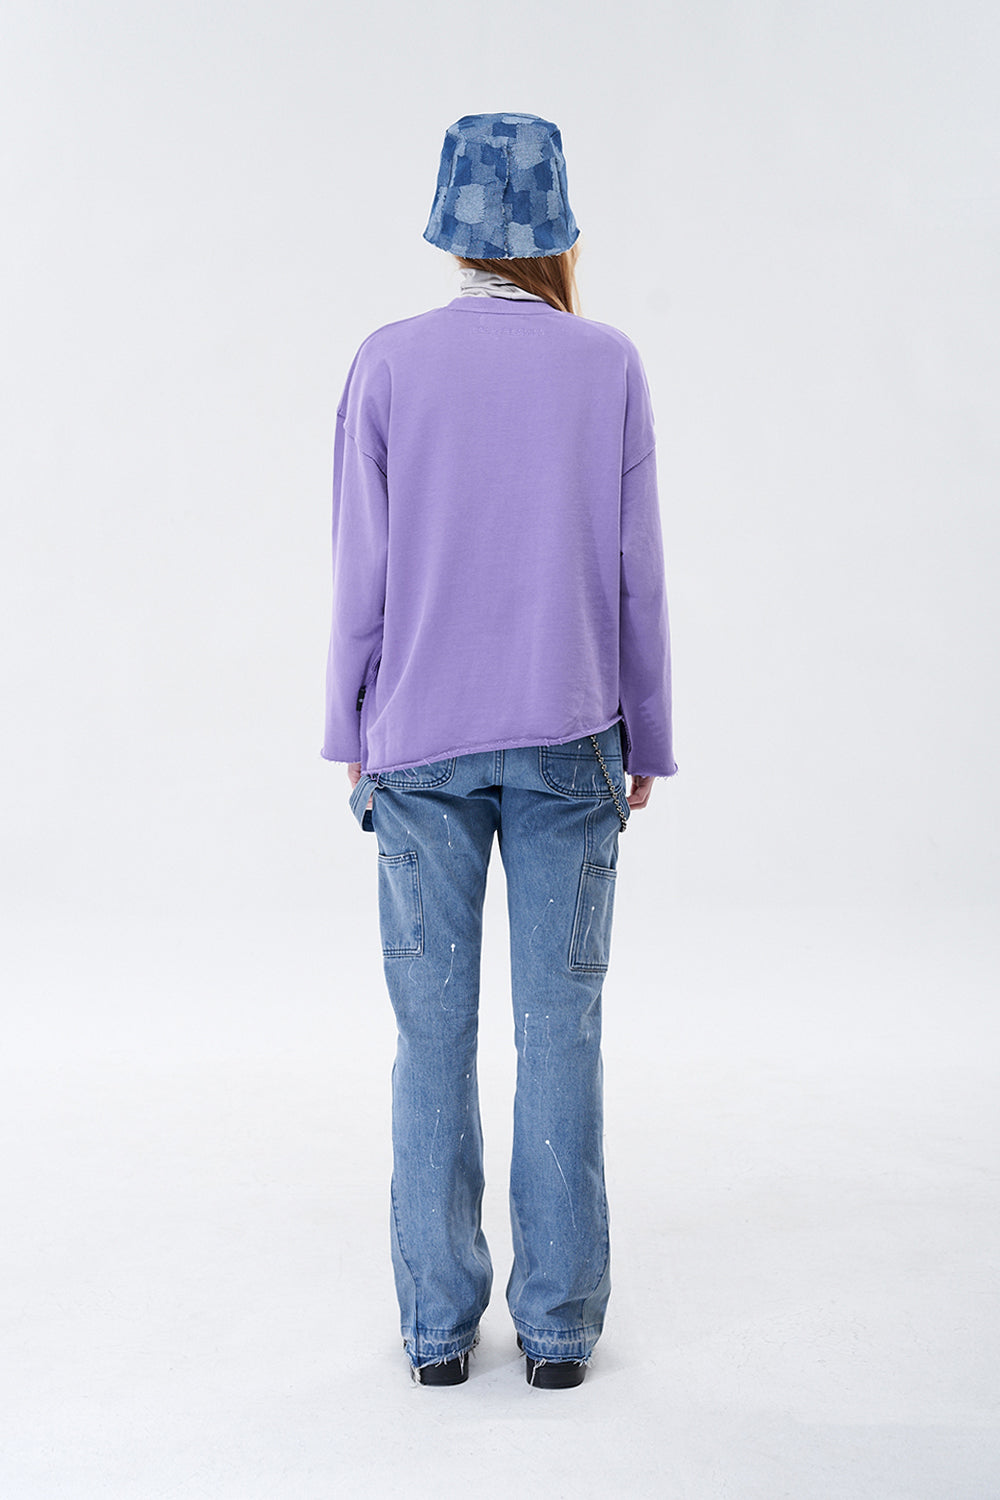 GRAFFITIONMIND  Incision Long Sleeve Tee / PURPLE